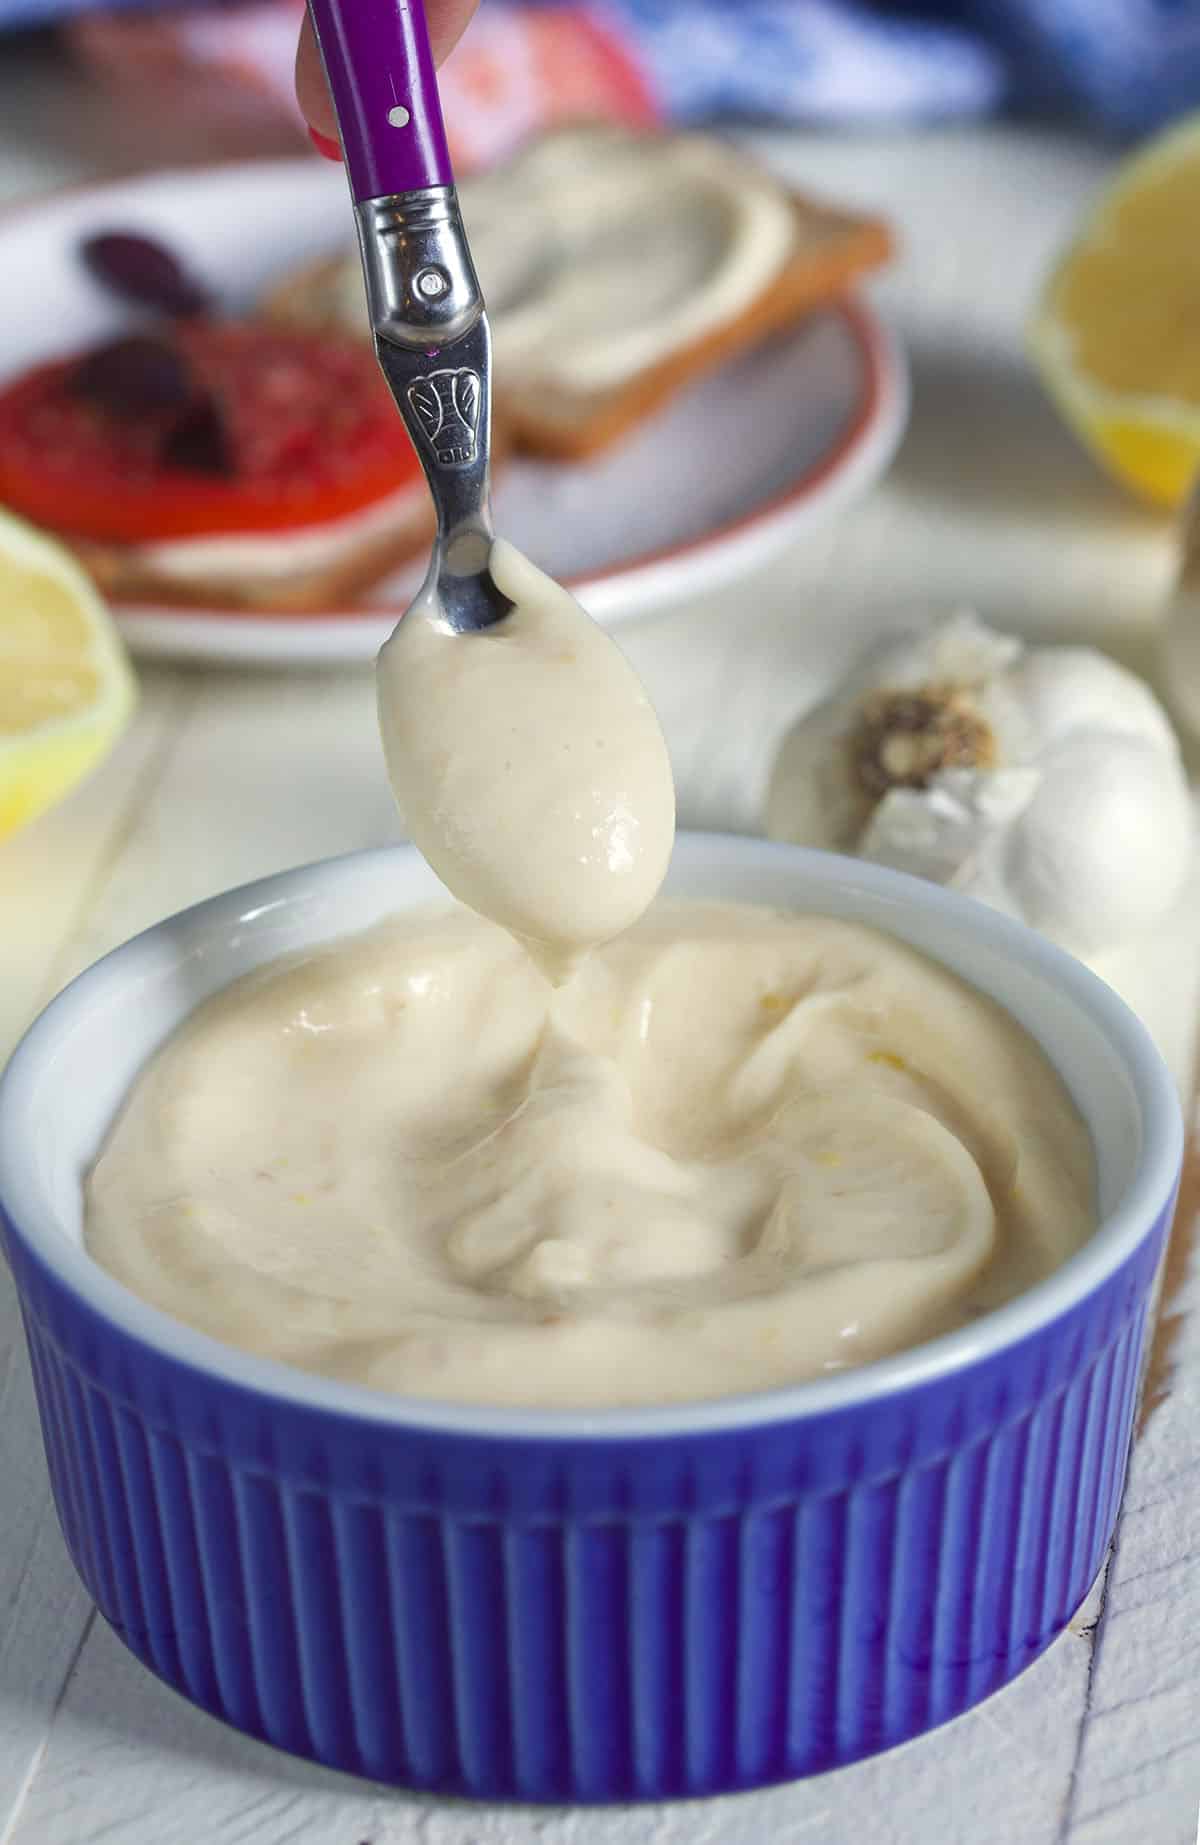 Garlic Aioli in a blue bowl with a scoop on a purple spoon.